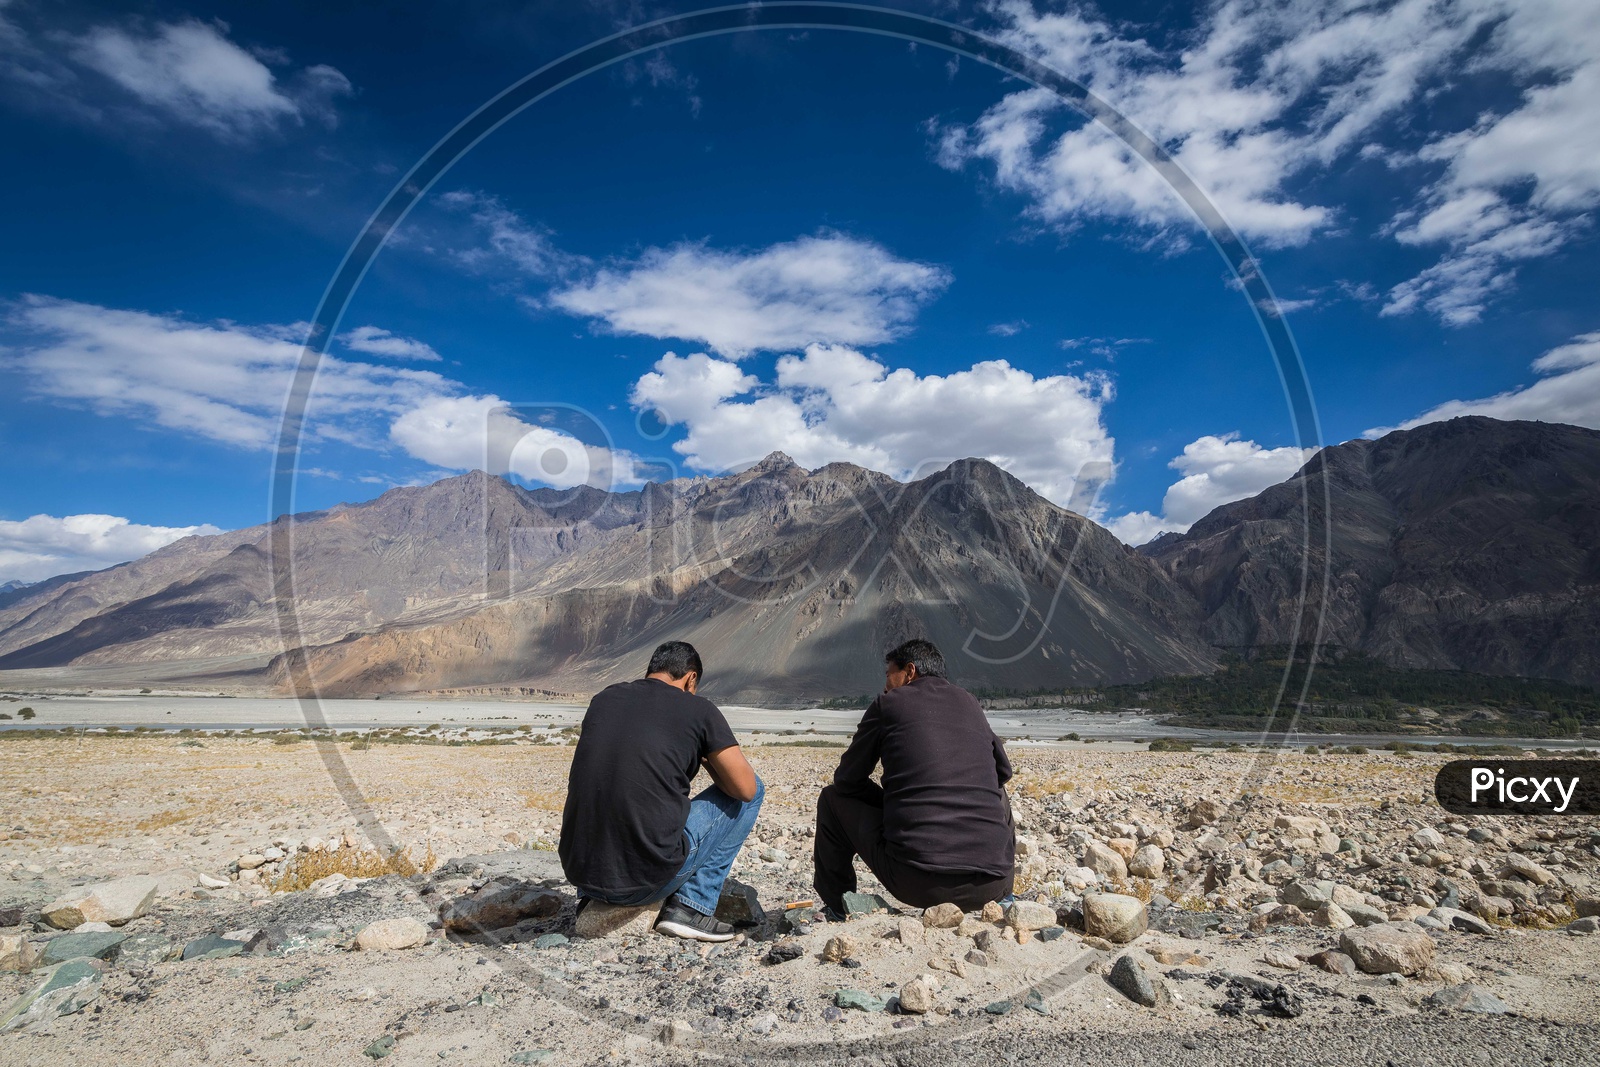 Two men sitting in front of the moutains